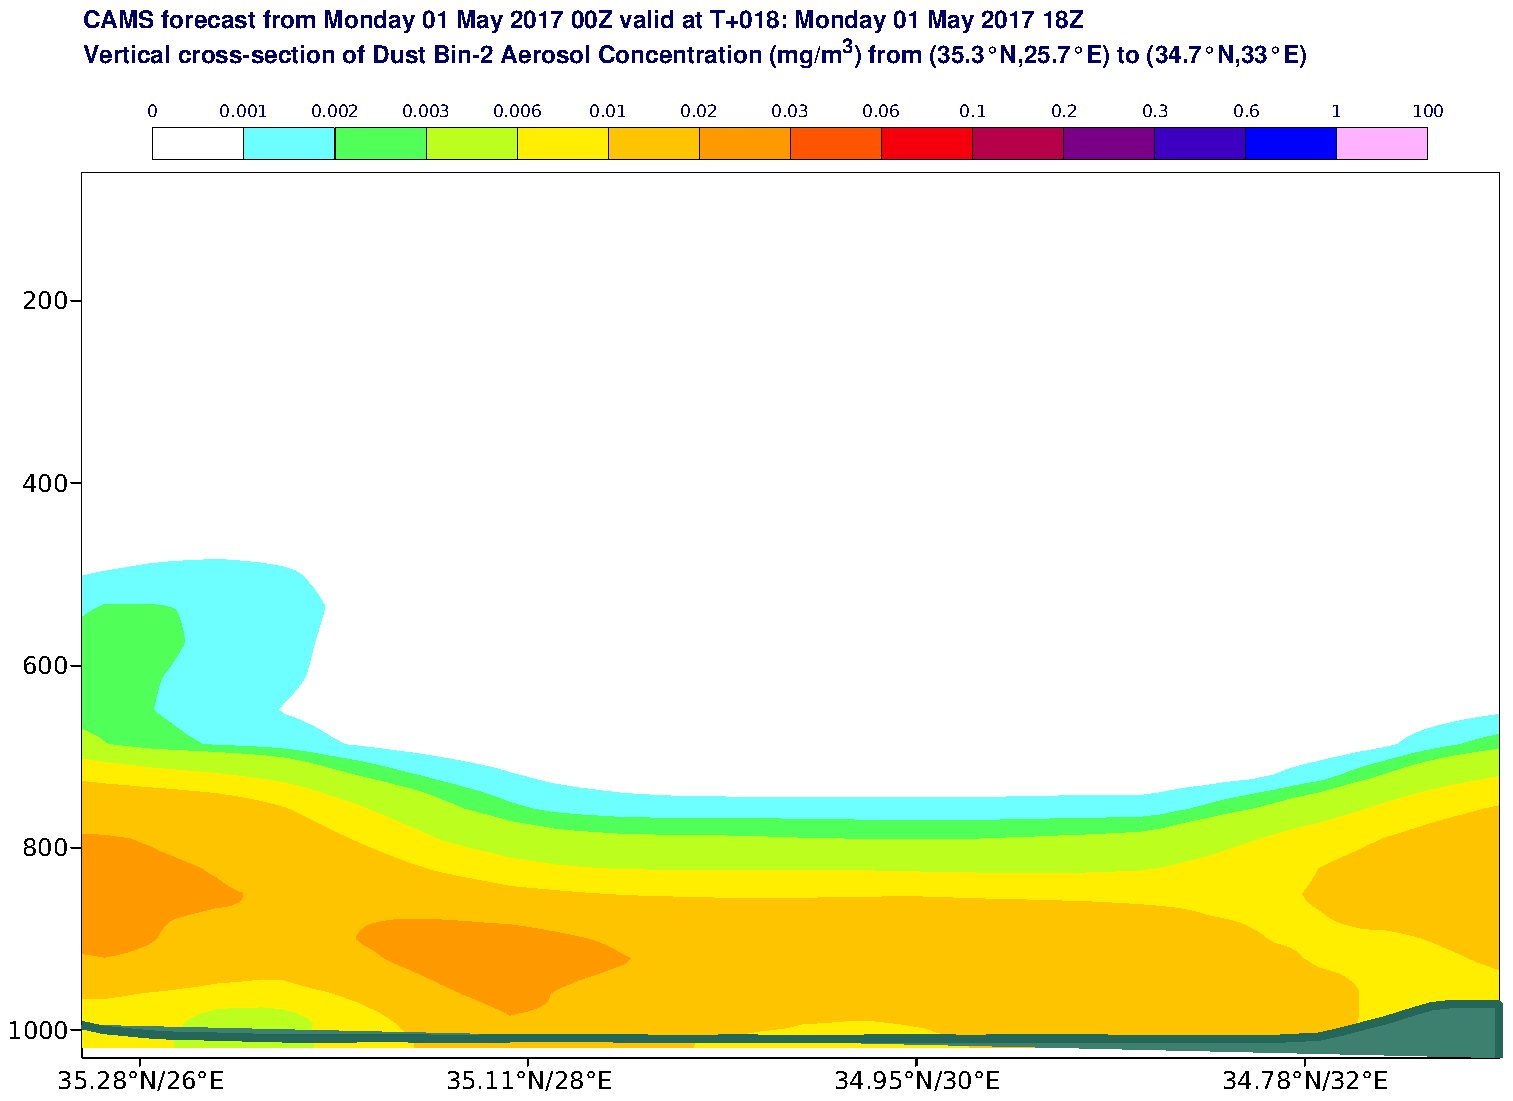 Vertical cross-section of Dust Bin-2 Aerosol Concentration (mg/m3) valid at T18 - 2017-05-01 18:00